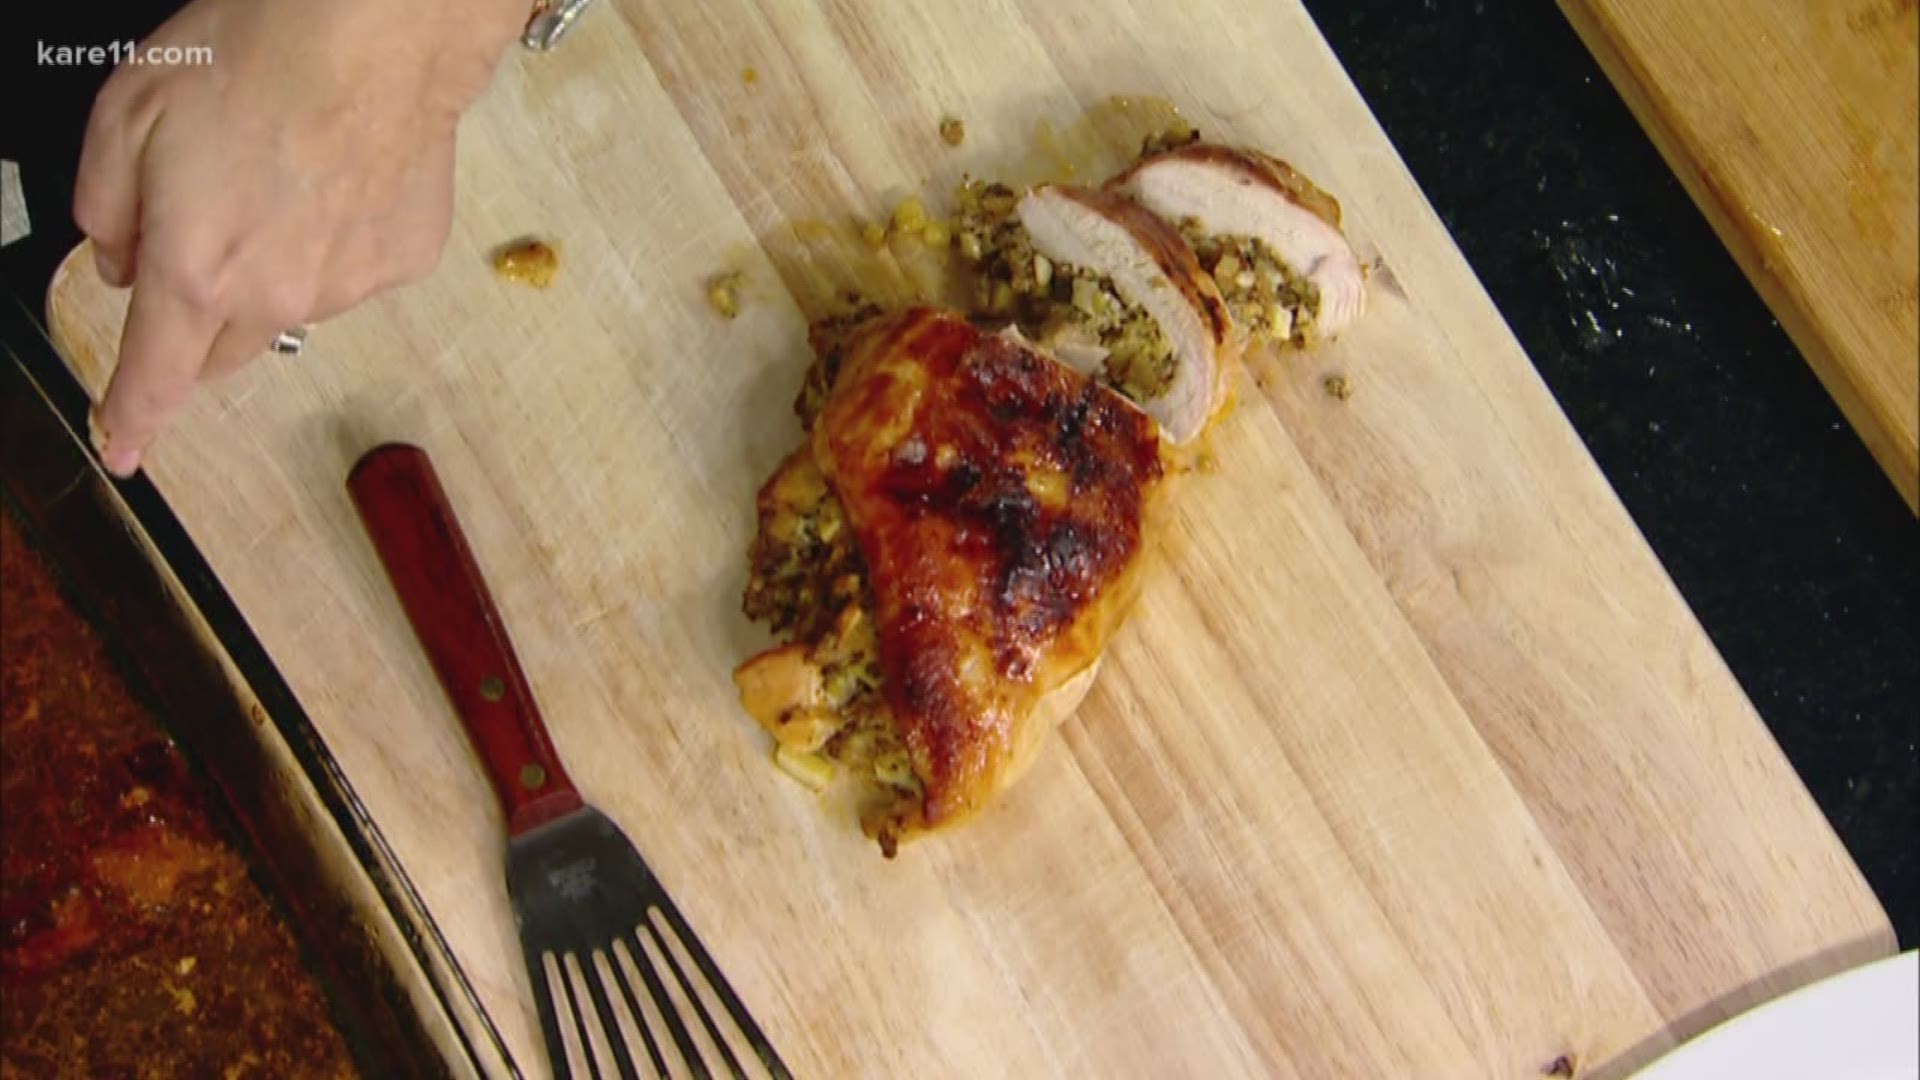 Chef Michelle Bernstein from Macy's Culinary Council demoed how to make the perfect stuffed turkey this Thanksgiving using a special technique. Follow along with the recipe: https://www.kare11.com/article/news/macys-culinary-council-thanksgiving-turkey-re